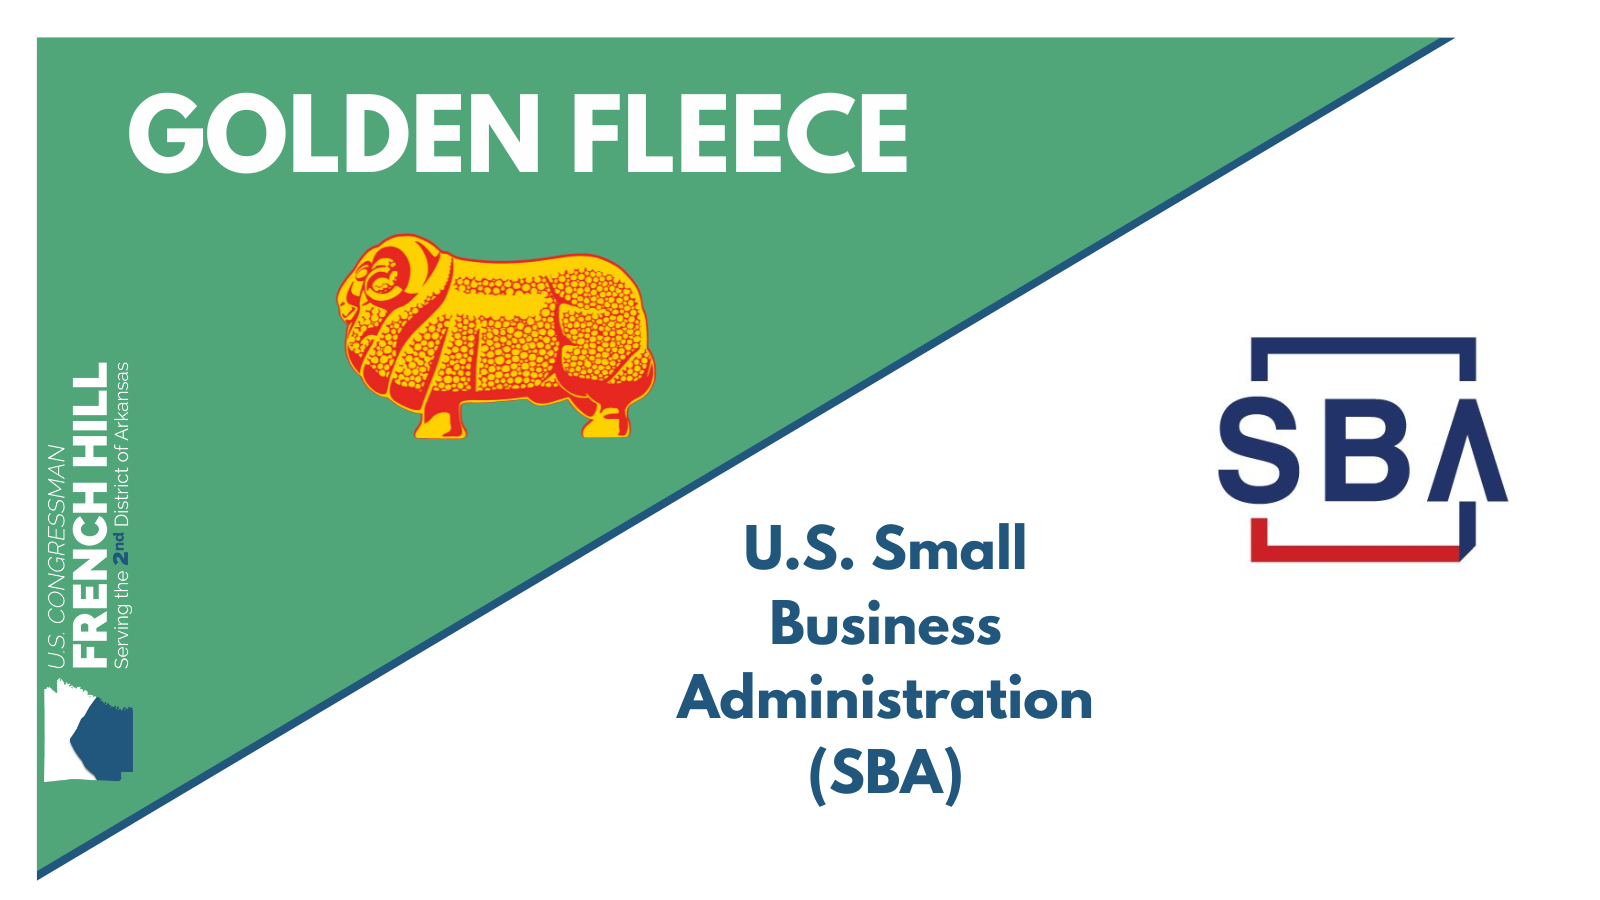 RELEASE: REP. HILL AWARDS GOLDEN FLEECE TO SMALL BUSINESS ADMINISTRATION FOR THEIR FAILURE TO RESTRICT CERTAIN PPP LOANS